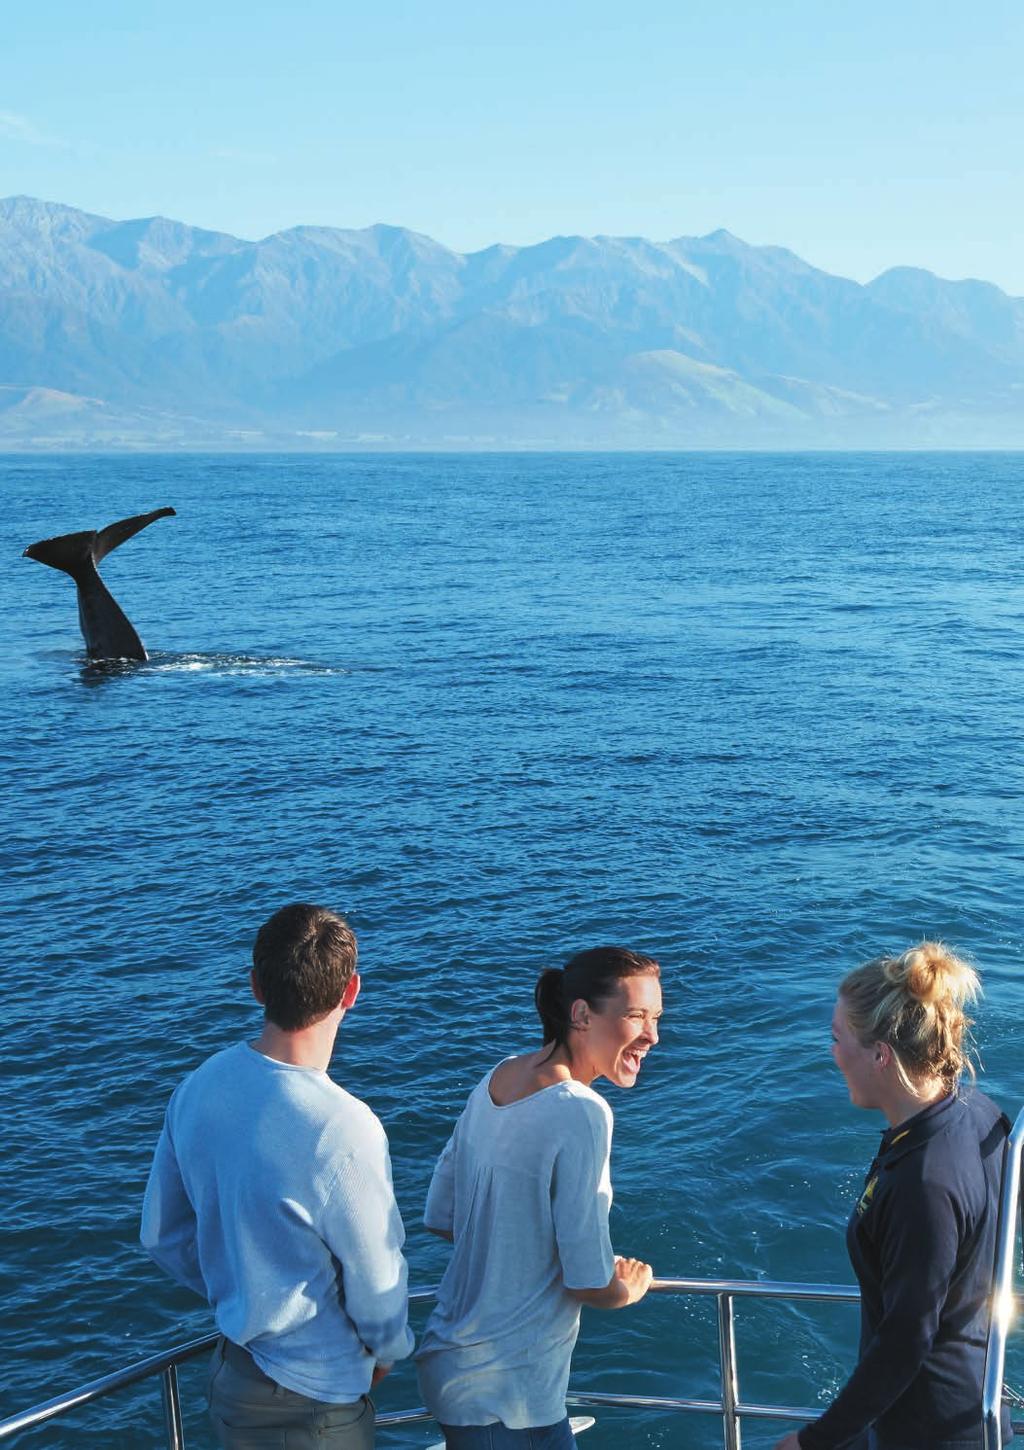 VISITOR TRAVEL SEASONS Kaikoura Indian holiday visitors favour summer and autumn with May being a popular month helping boost arrivals in the late autumn shoulder newzealand.